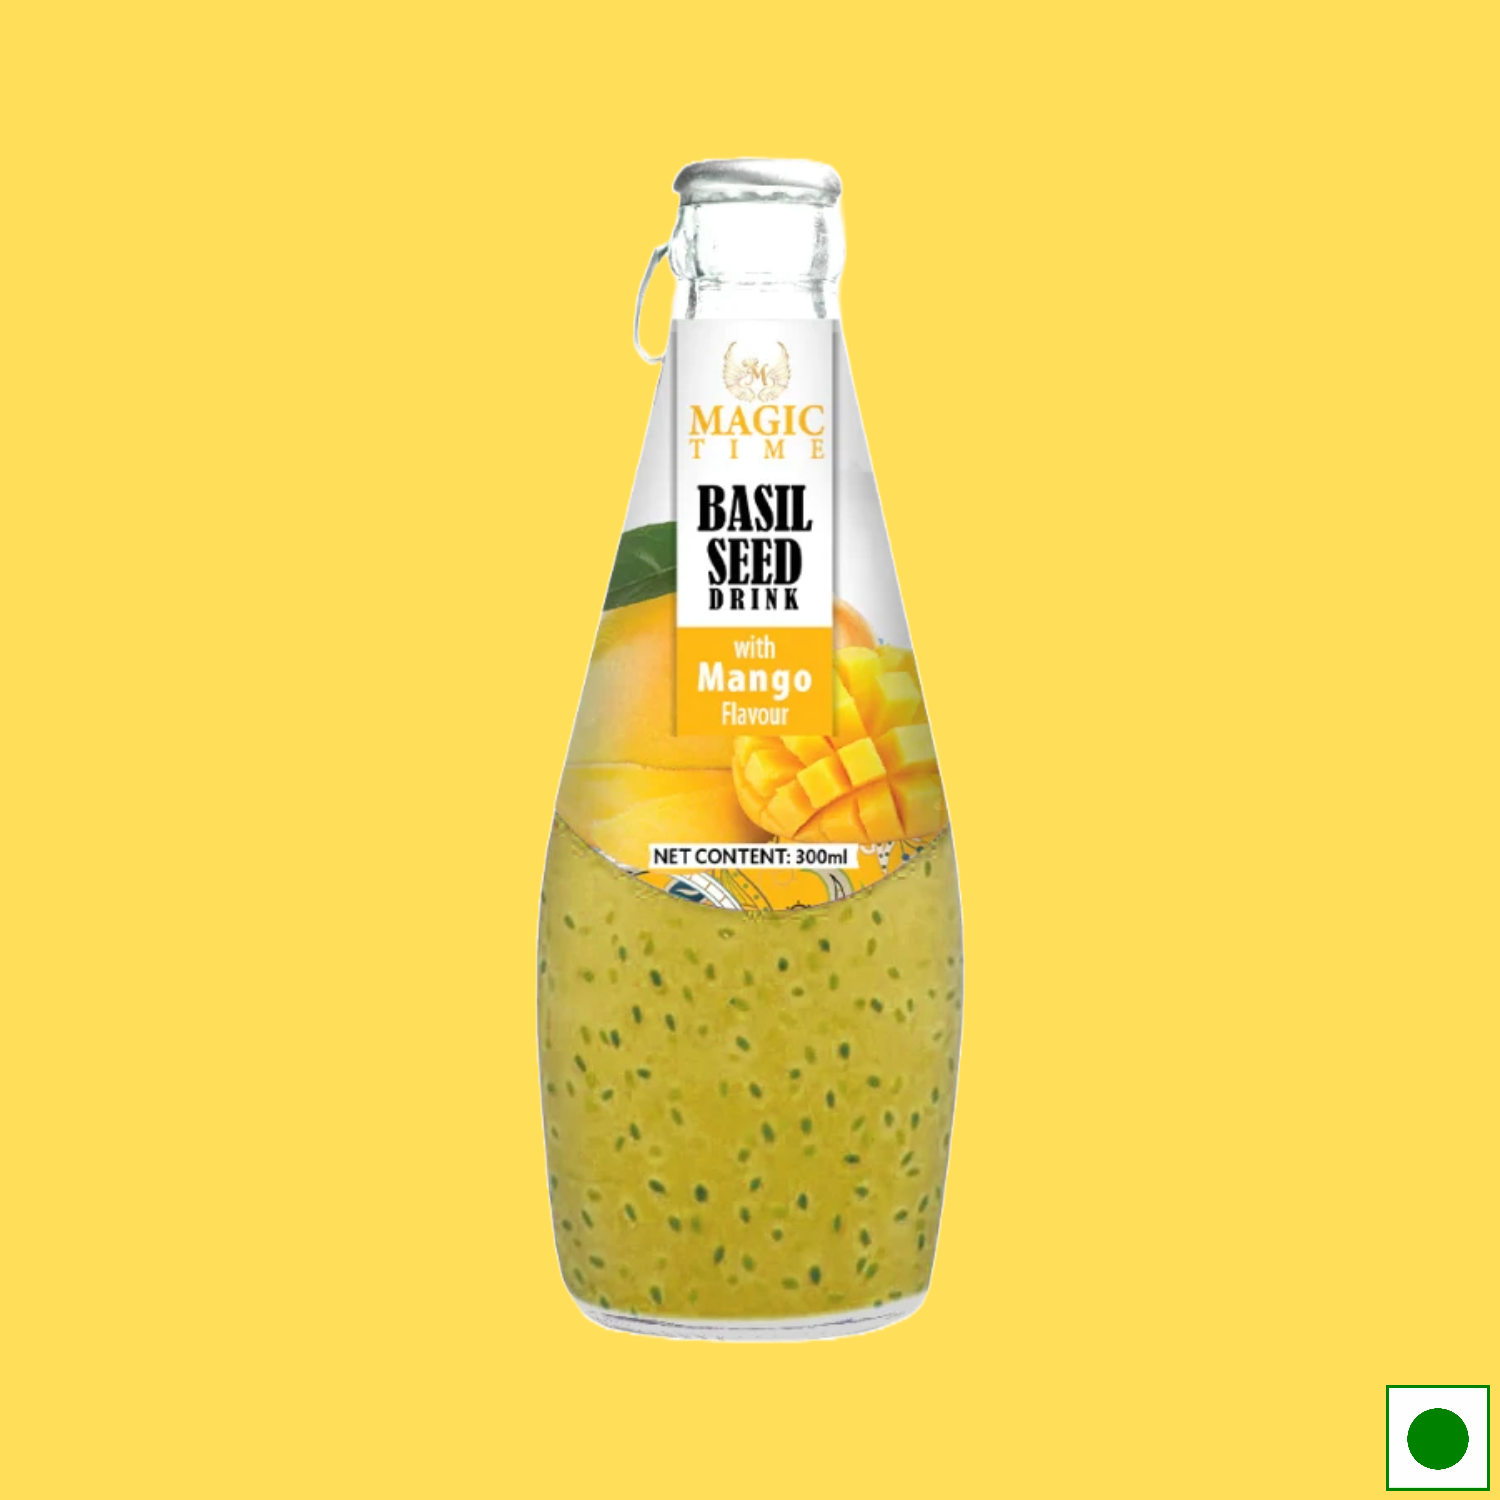 Magic Time Mango Flavored Basil Seed Drink, 300ml (Imported)